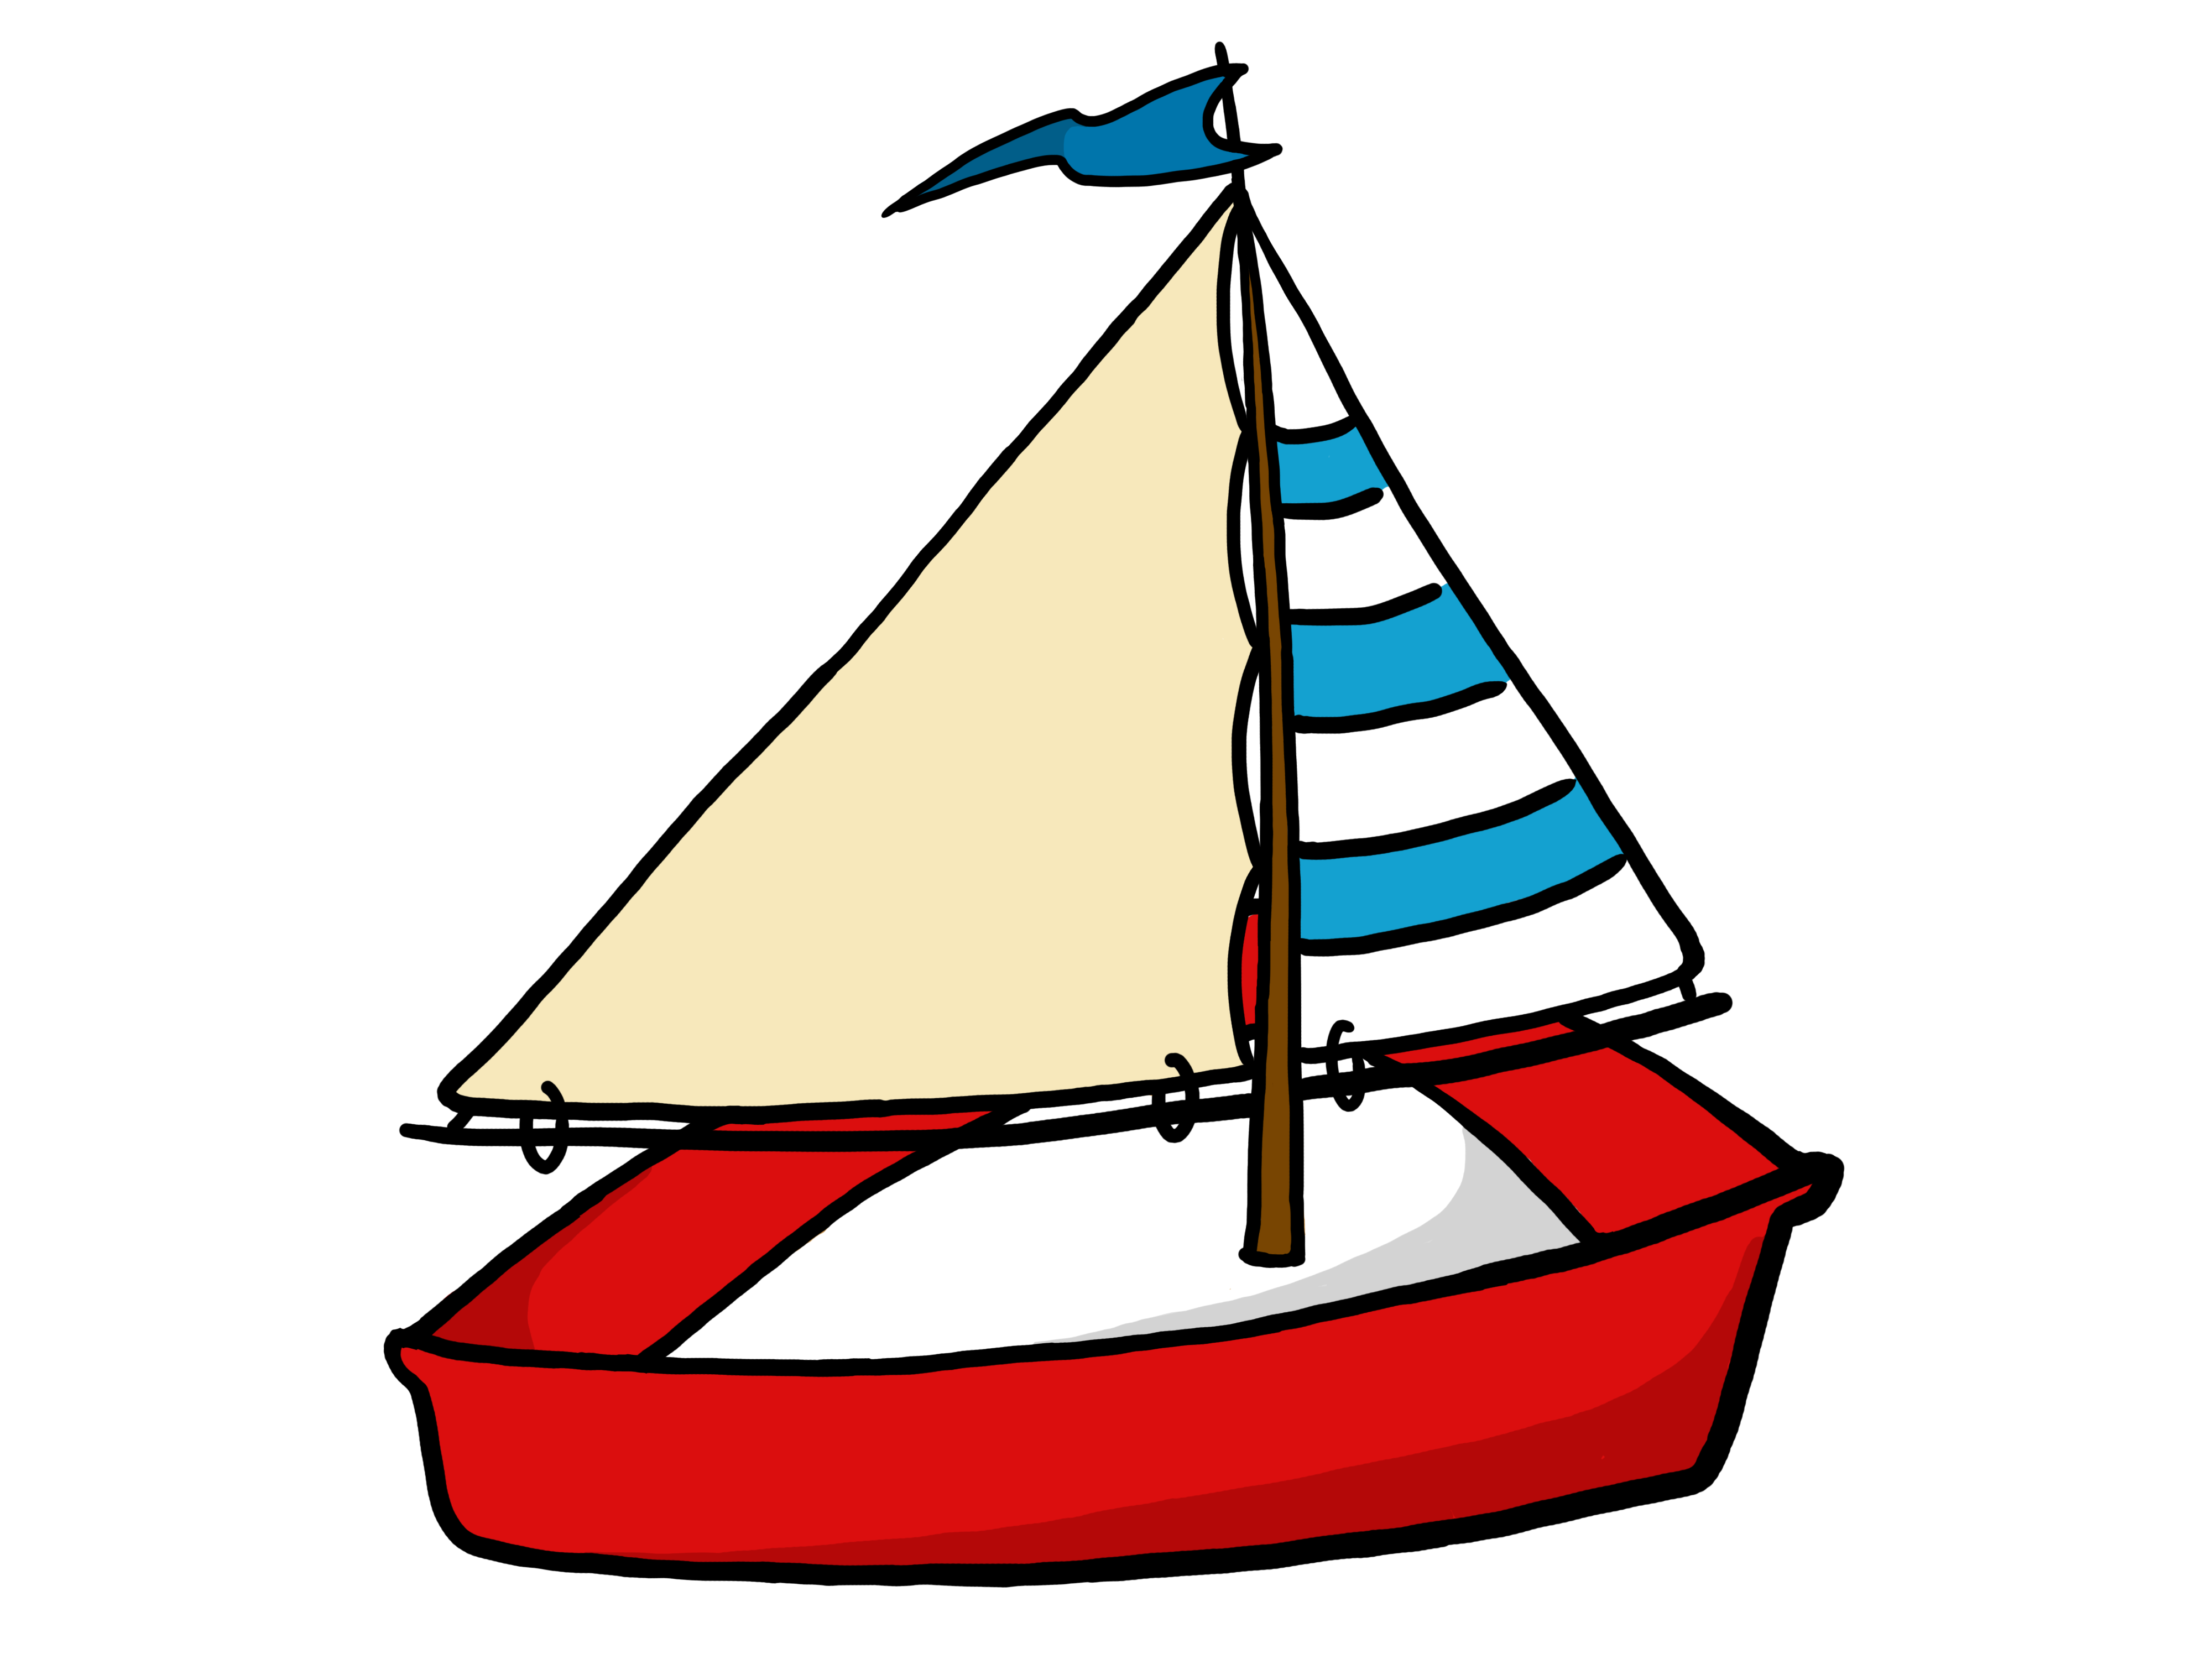 Toy Sailboat Clipart - Free Clipart Images